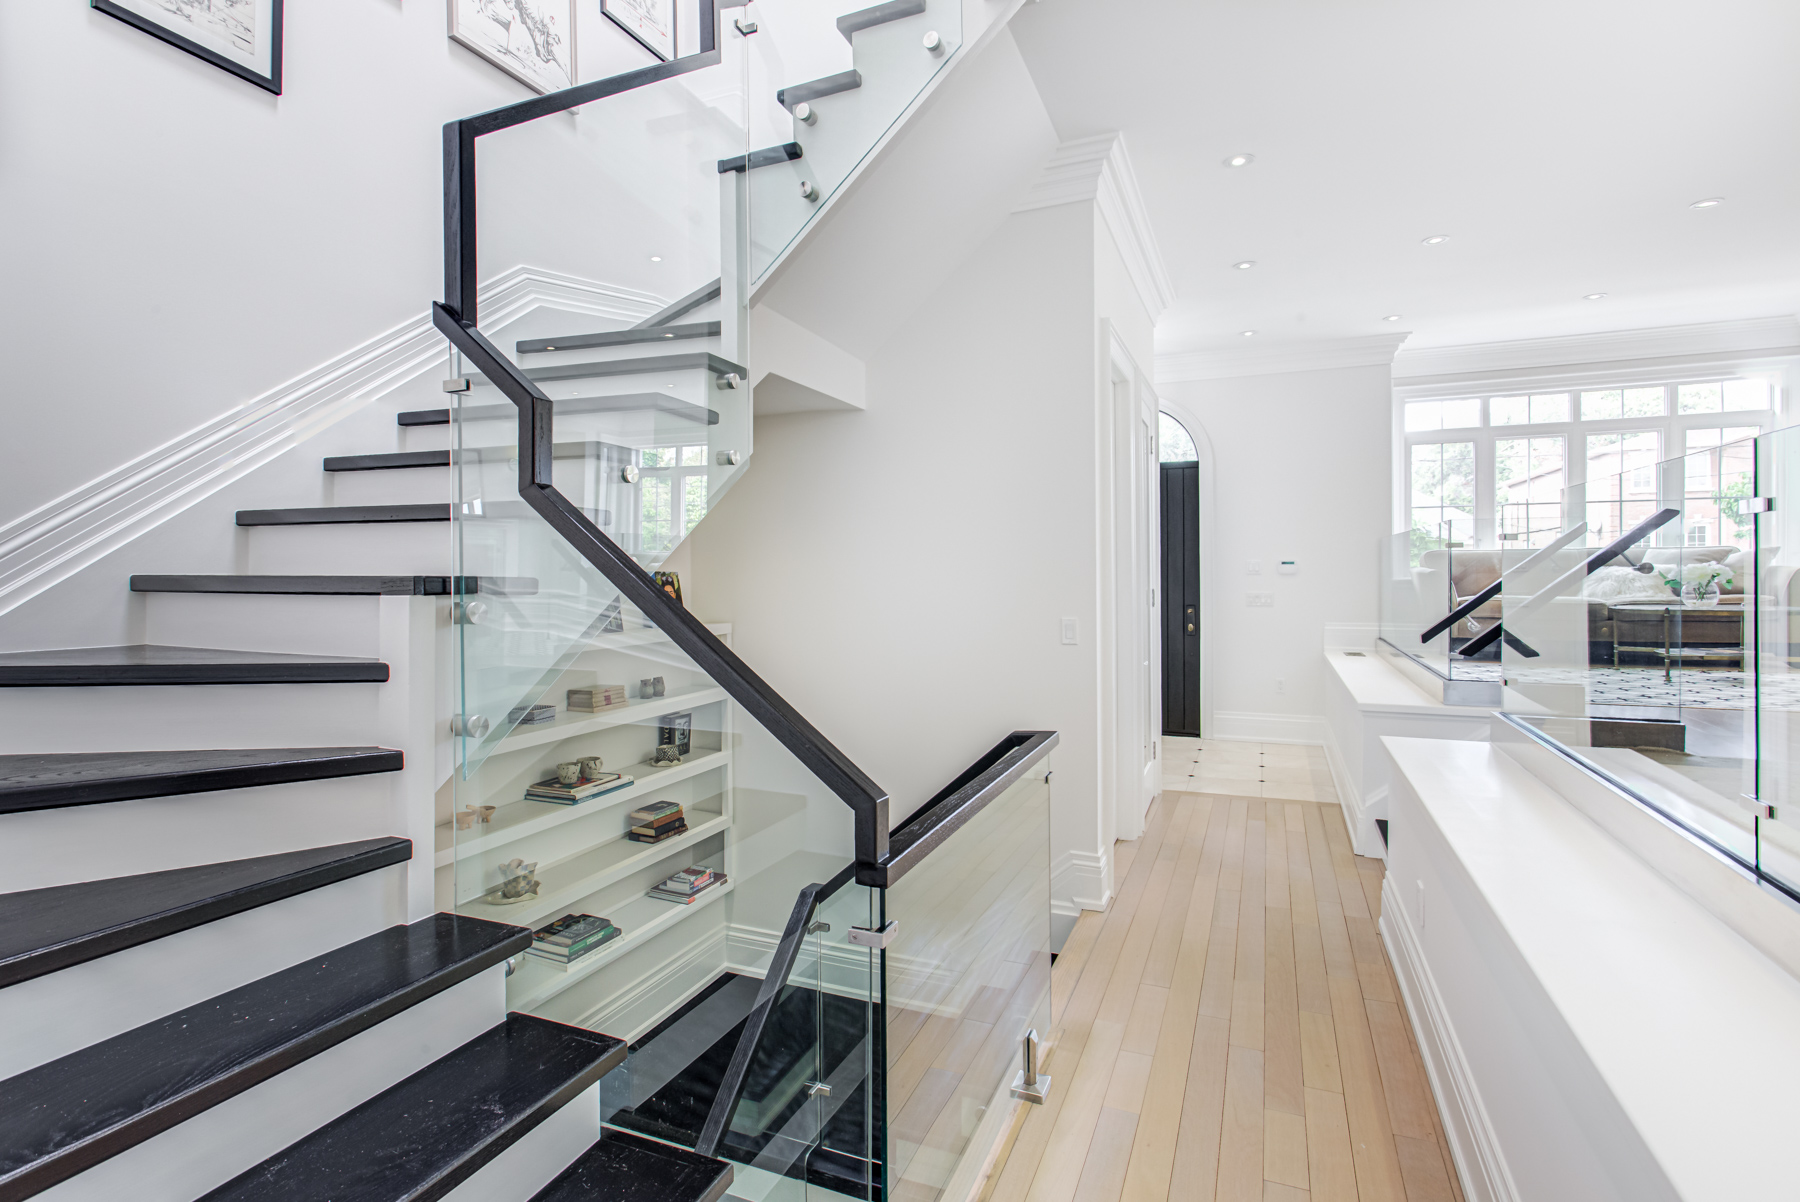 House staircase with black steps and glass rails.